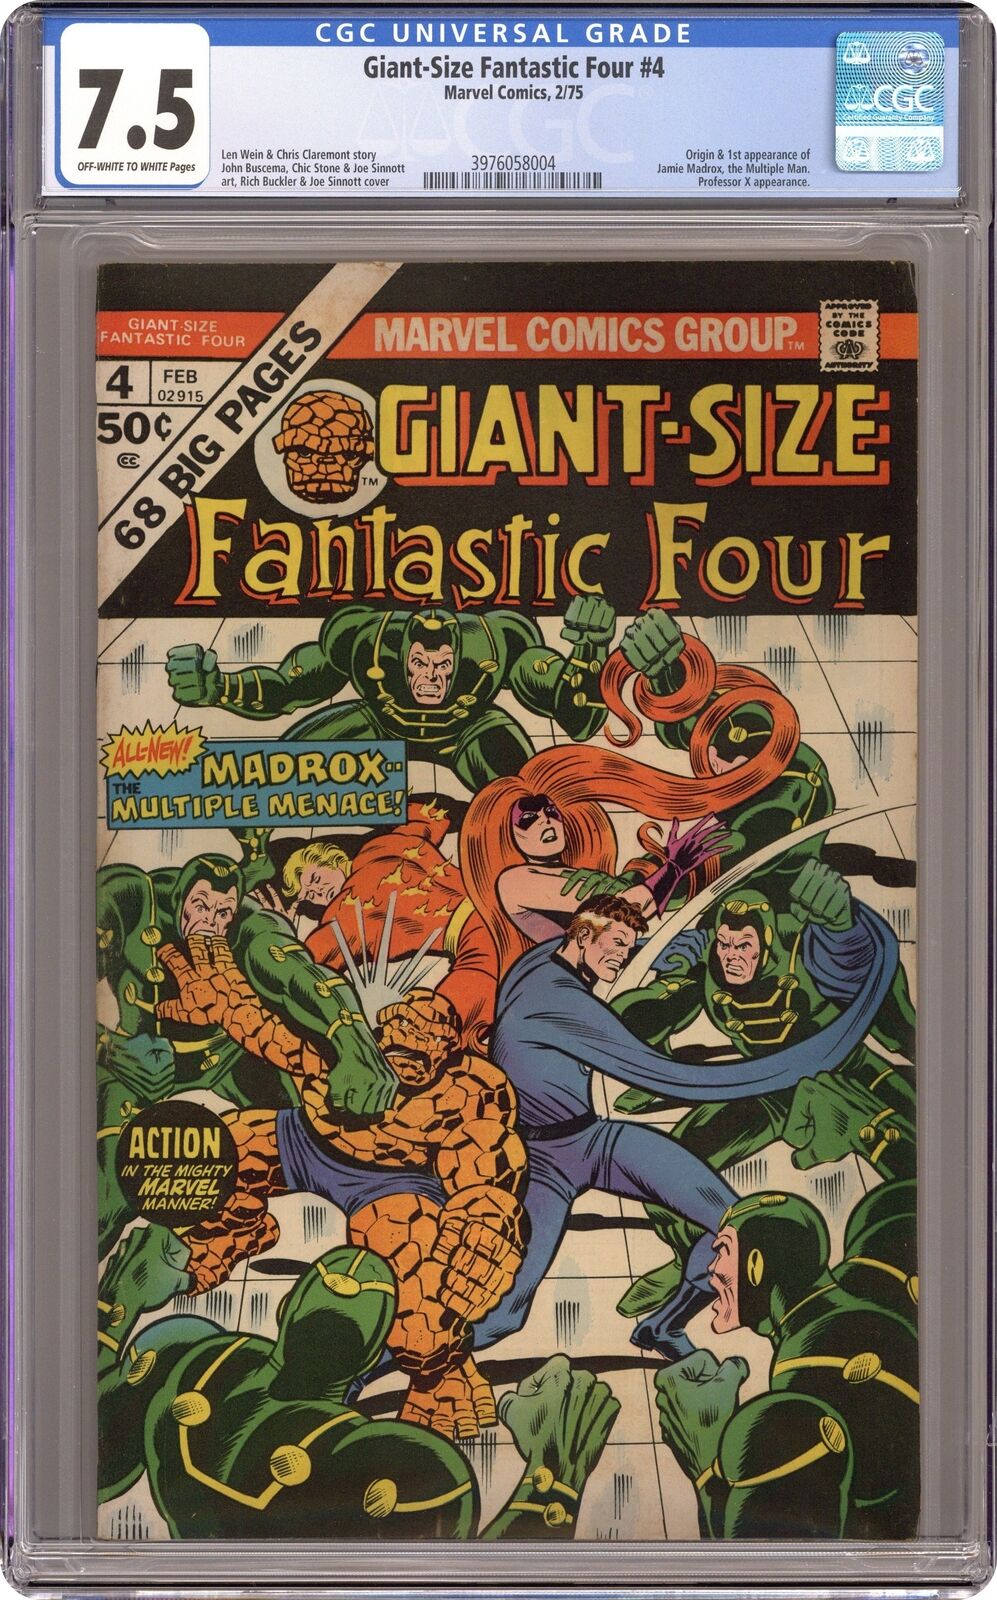 Giant Size Fantastic Four #4 CGC 7.5 1975 3976058004 1st app. Madrox